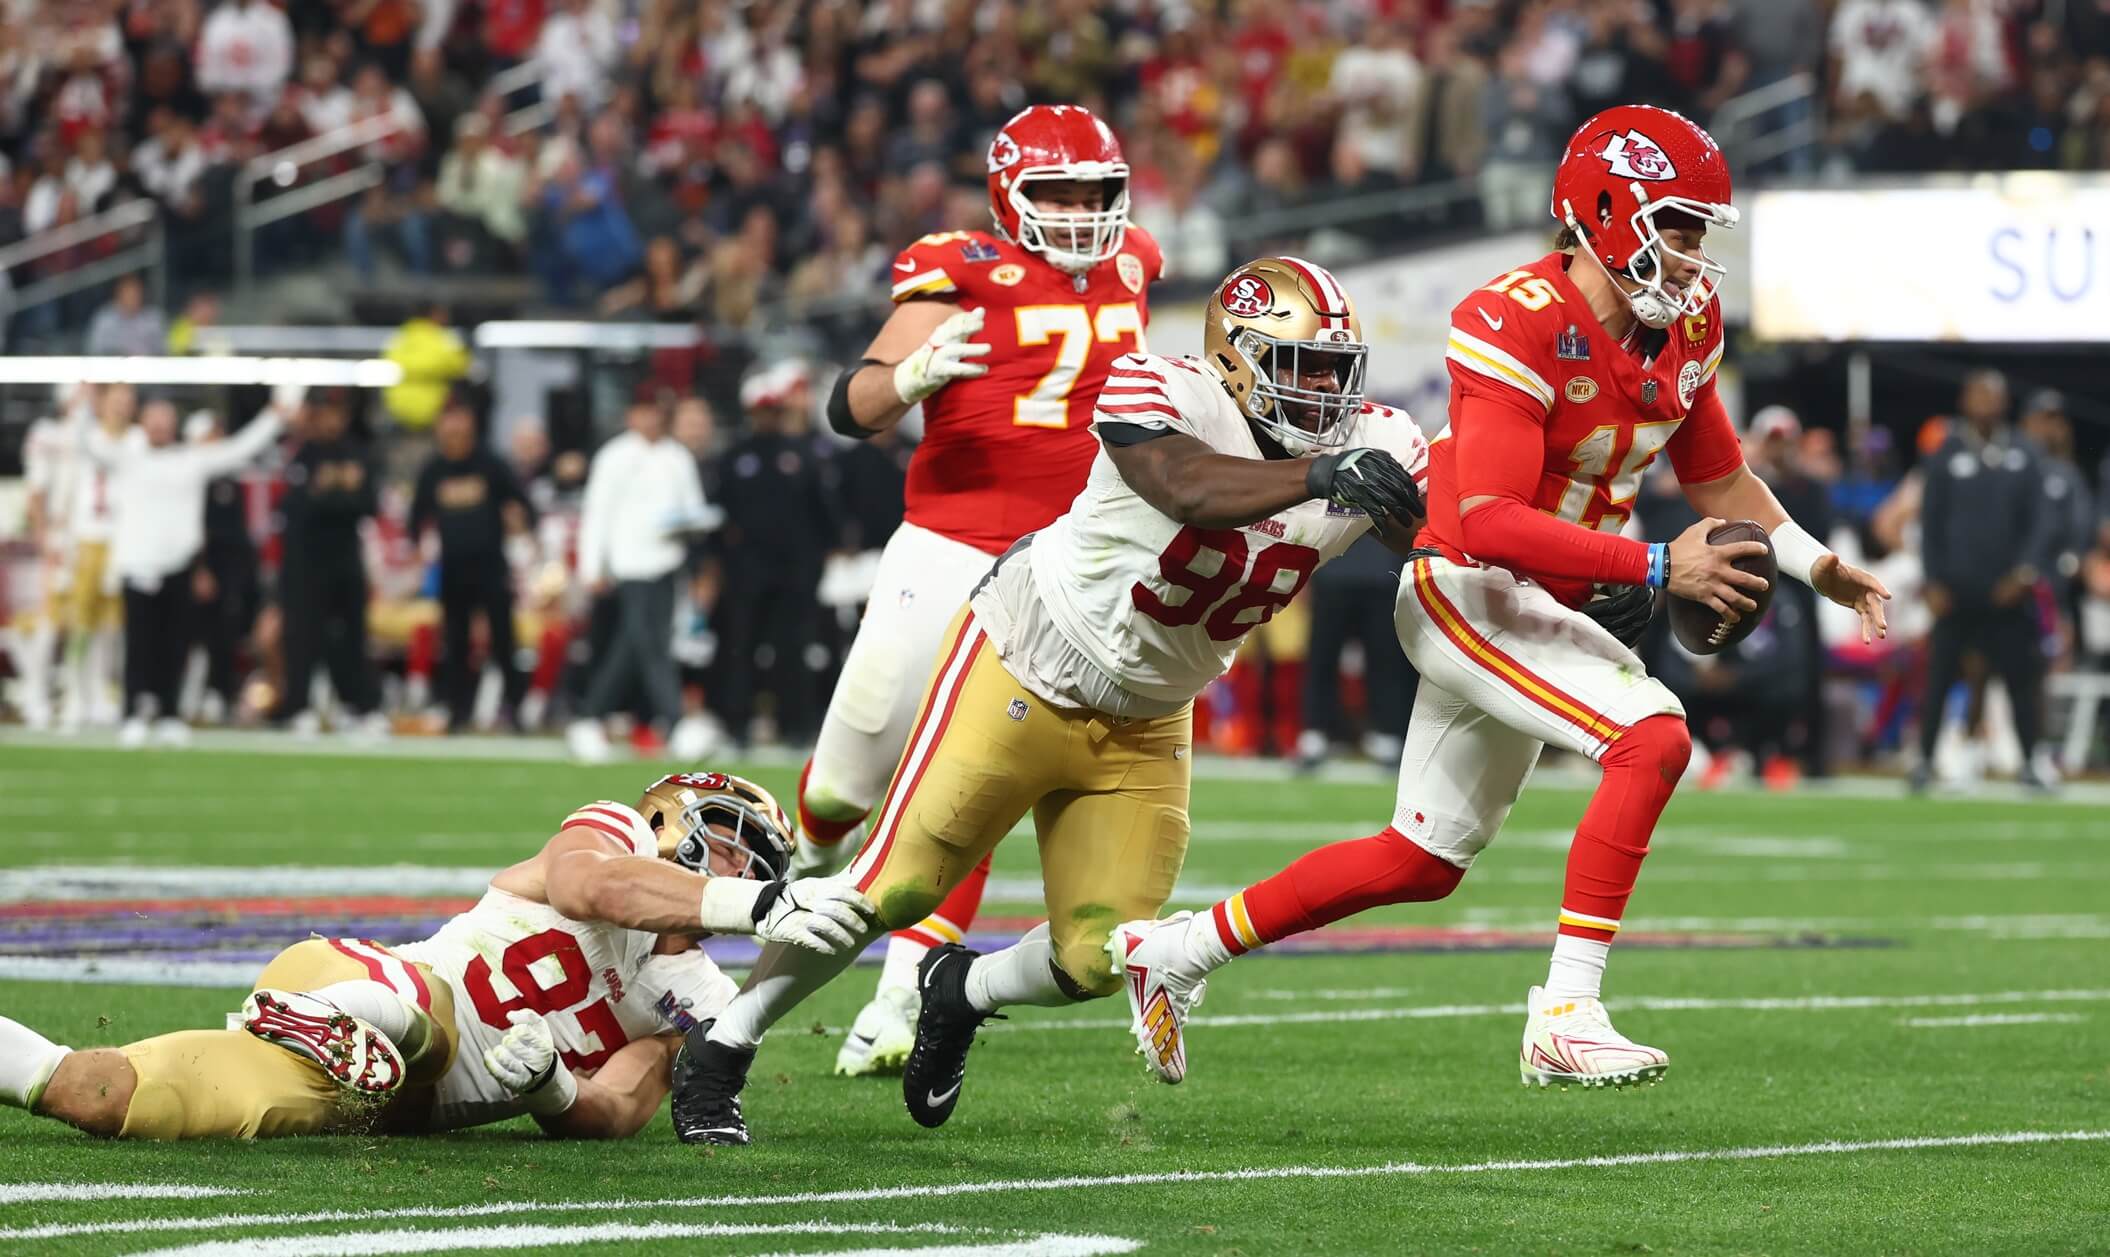 Kansas City Chiefs quarterback Patrick Mahomes (15) is pressured by San Francisco 49ers defensive tackle Javon Hargrave (98) in the fourth quarter in Super Bowl LVIII at Allegiant Stadium.